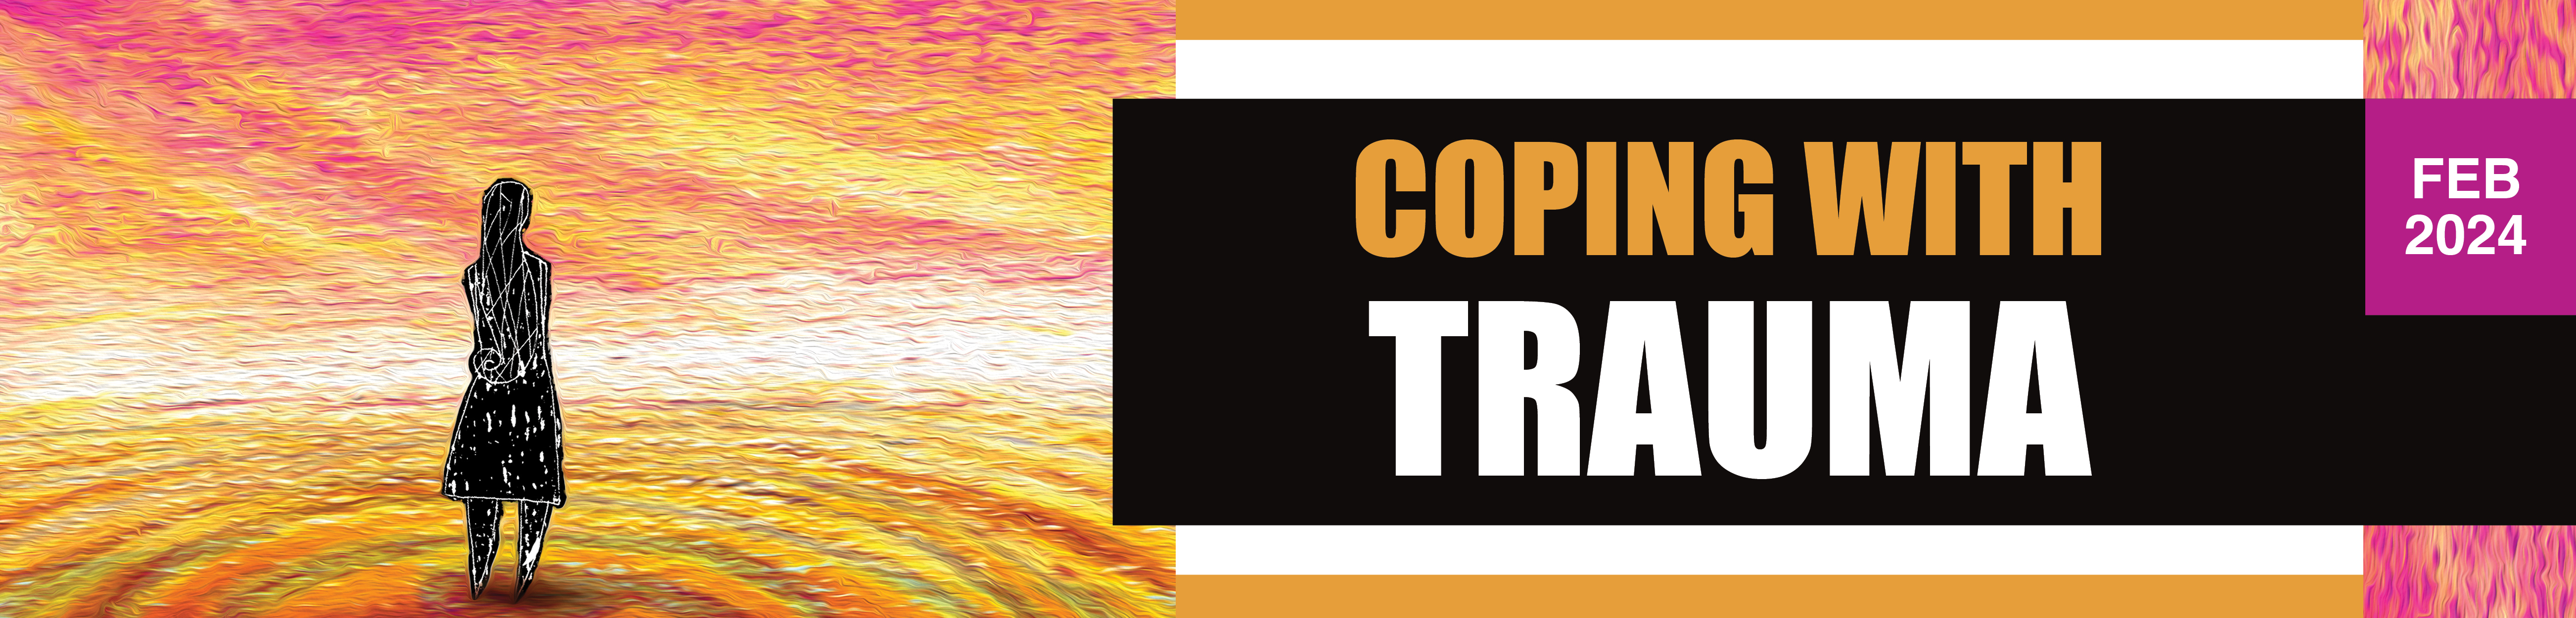 Banner graphic with image and text. Image: A silhouetted woman standing in the center of an inescapable maze. Text: Coping with Trauma - February 2024.